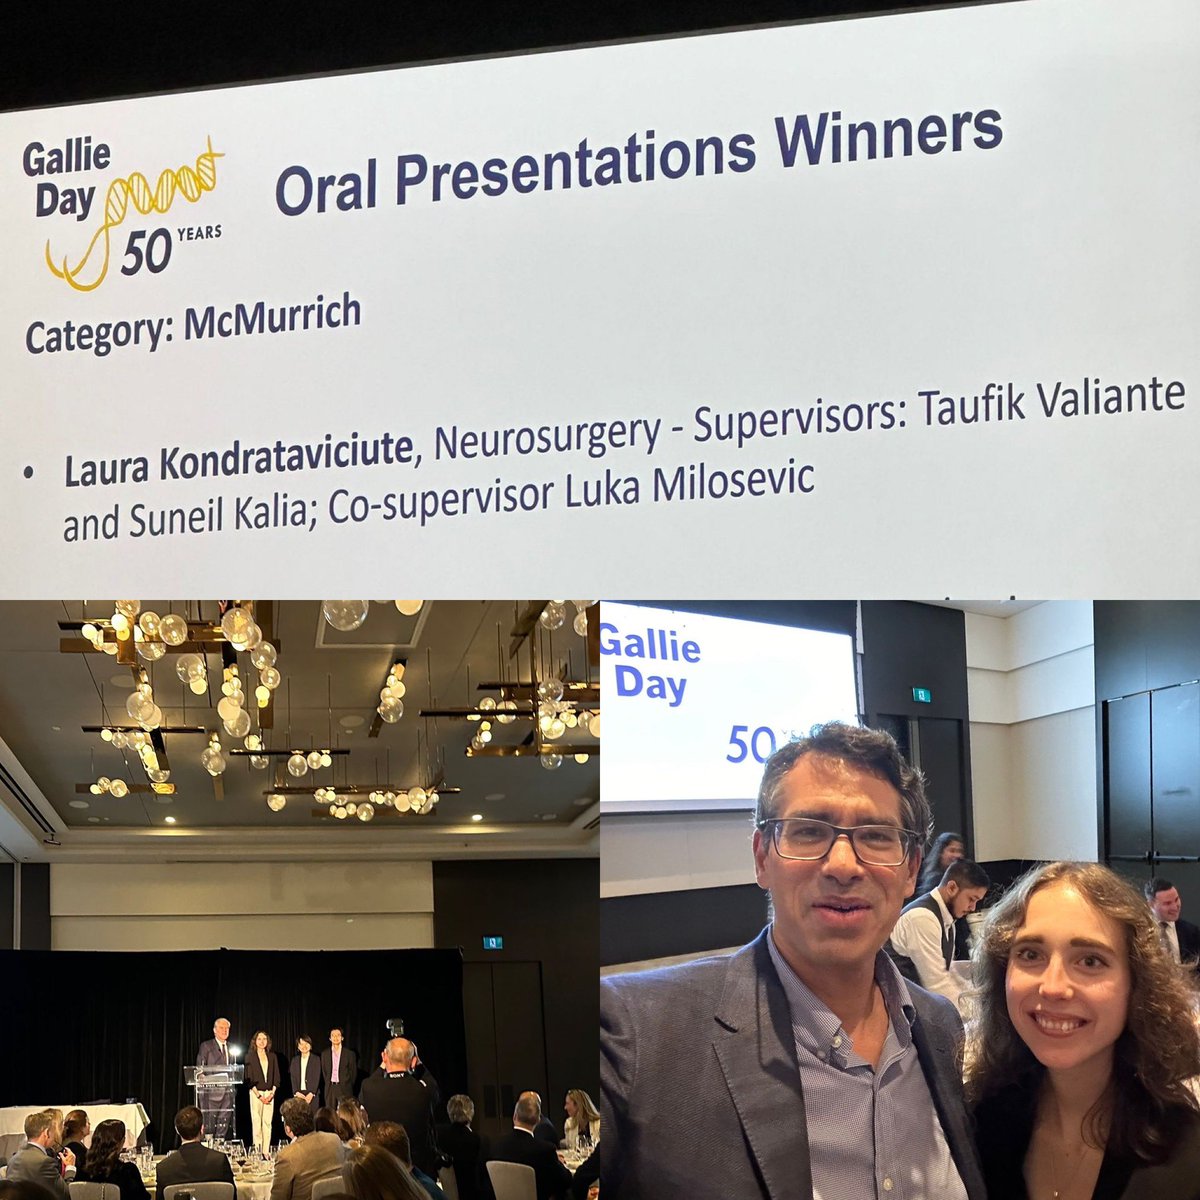 #N2BL @mpc_utoronto student @laurakondr wins🥇(1st place) at 50th Surgery Gallie Day for her research exploring a model of Parkinson’s using electrophysiology. Laura is co-supervised by three @CRANIA_Toronto scientists: @kalialabs @lukamneuro @DrValiante Congratulations Laura 👏🏽!